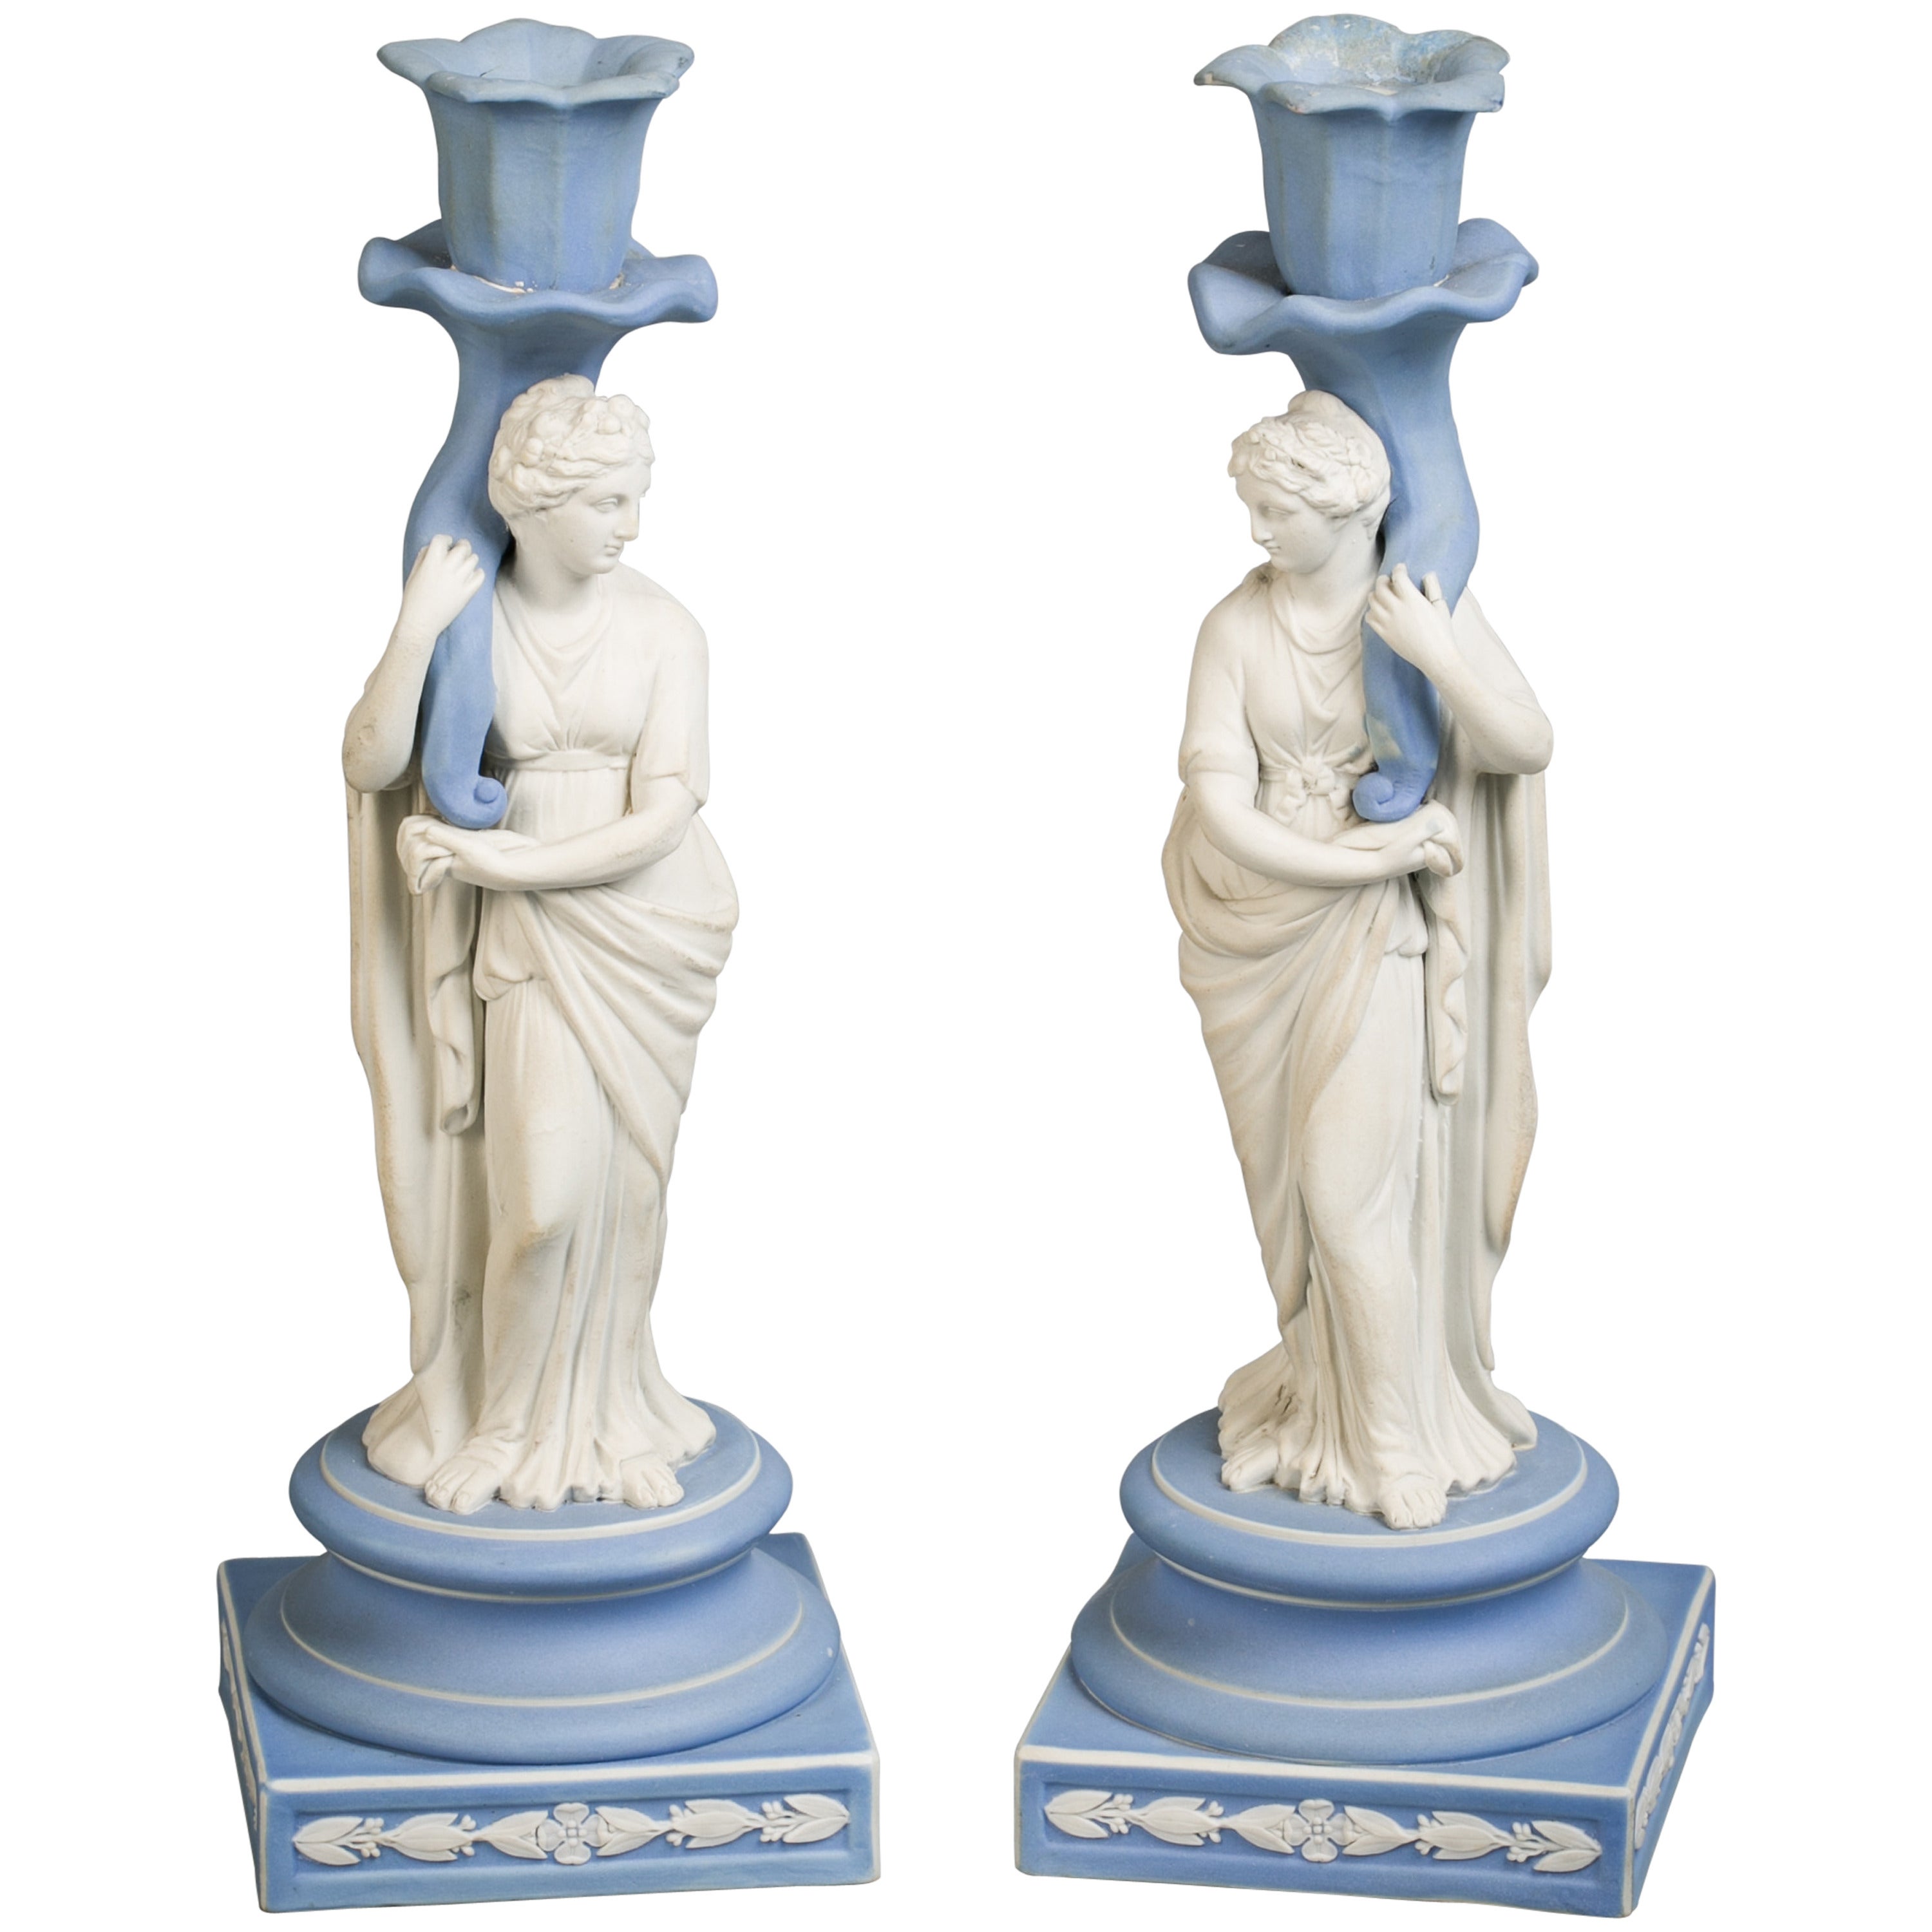 Pair of Wedgwood Figural Candlesticks of Pomona and Ceres, 19th Century